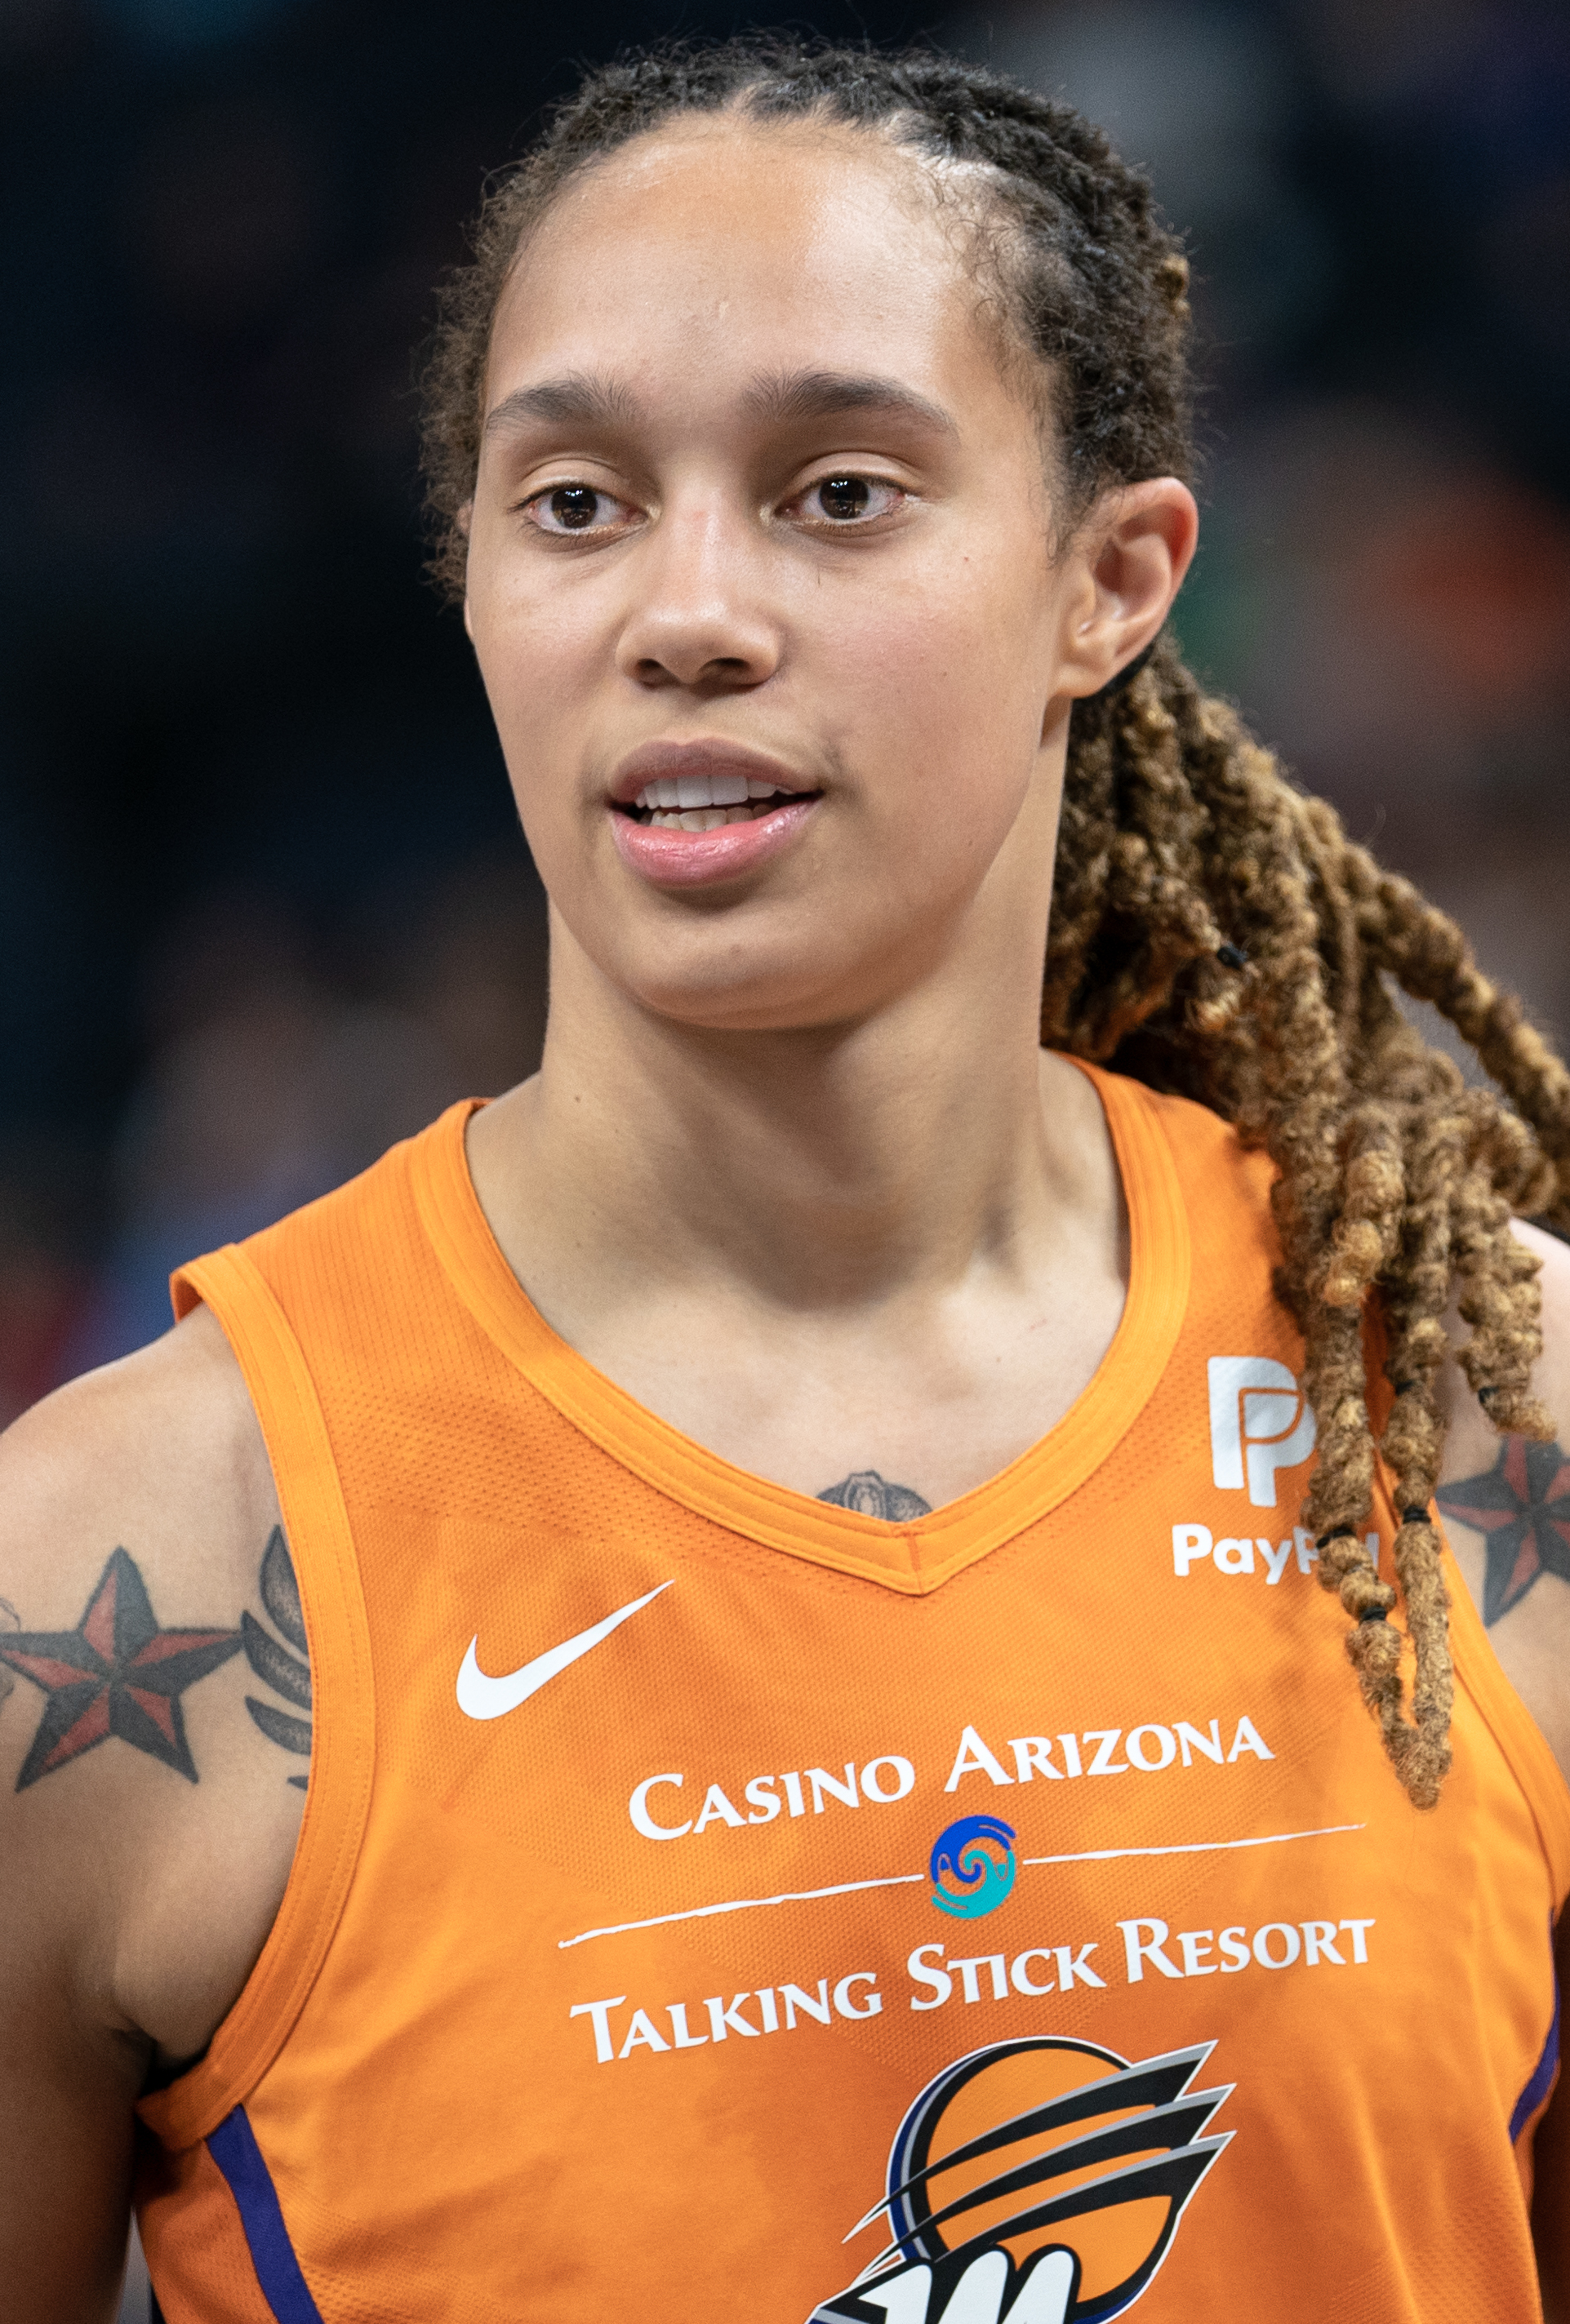 Brittney Griner urges Biden to bring home reporter Gershkovich, accused of spying in Russia